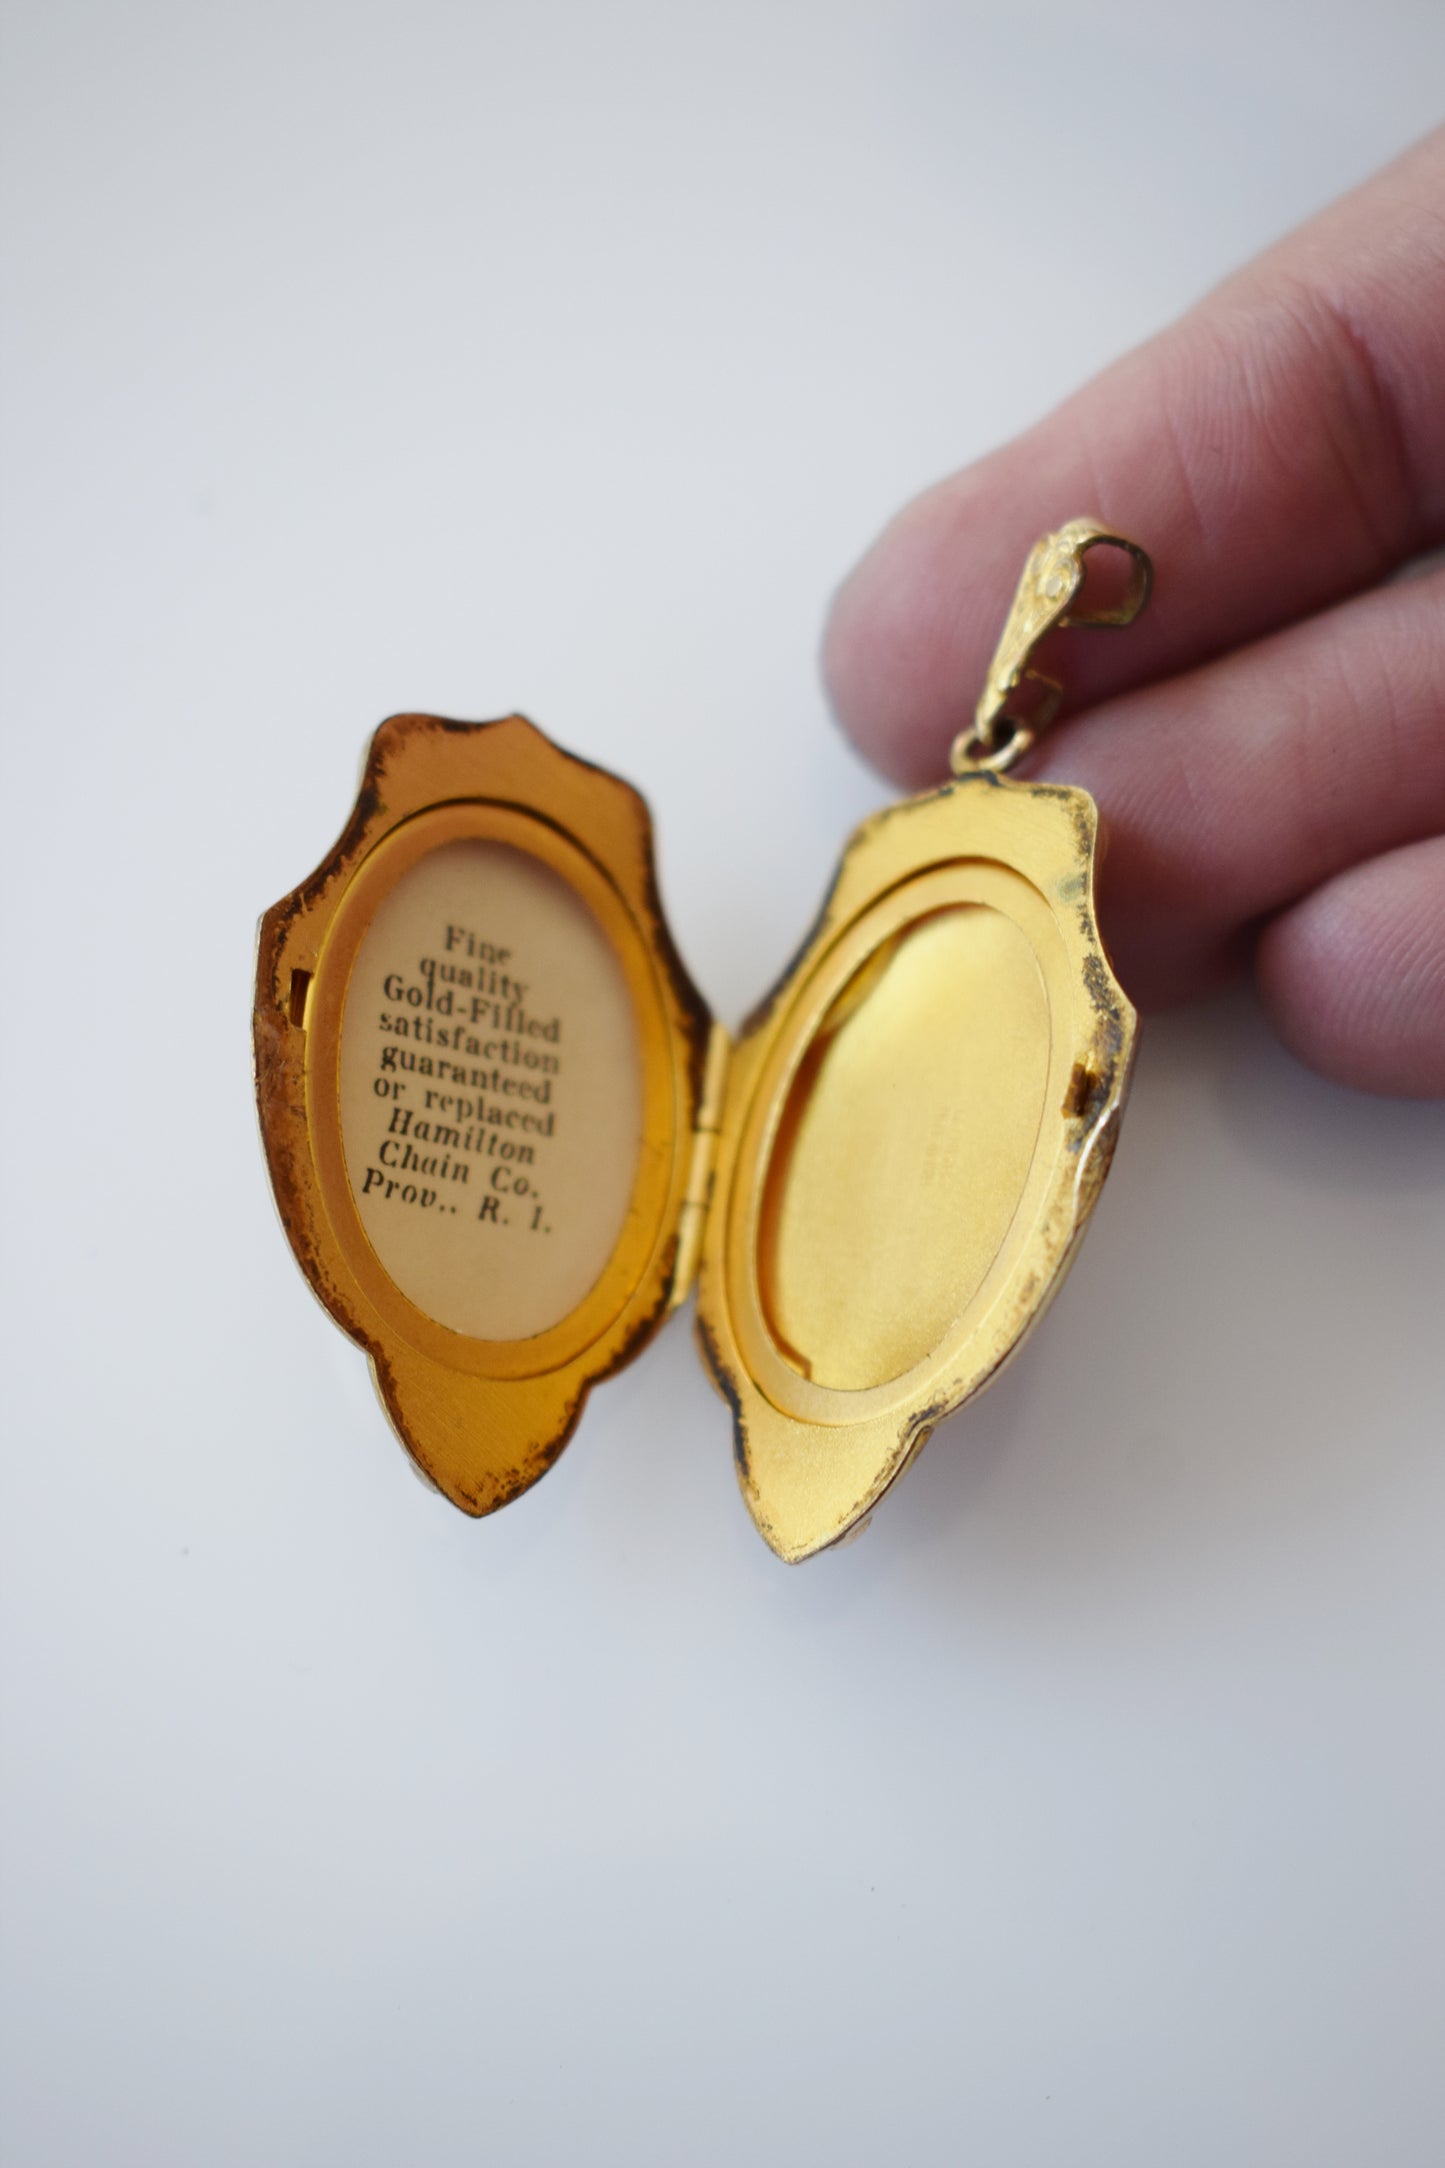 Vintage Gold Shield-Form Locket with Initial "E"